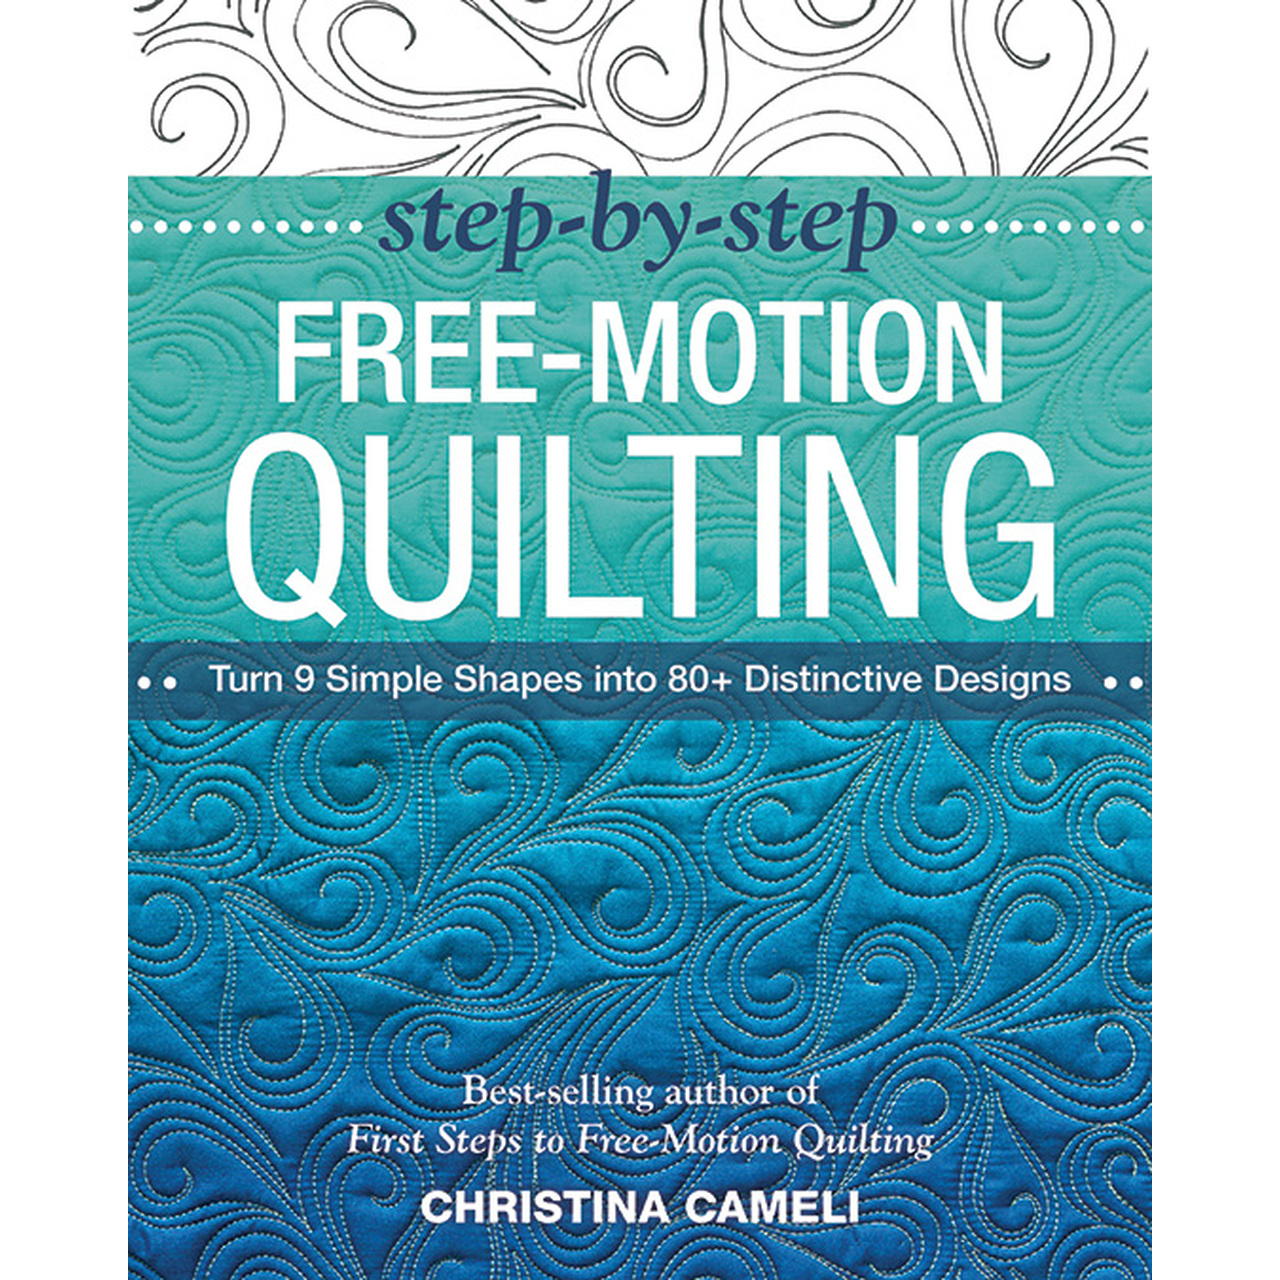 Step-by-Step Free-Motion Quilting Book by Christina Cameli